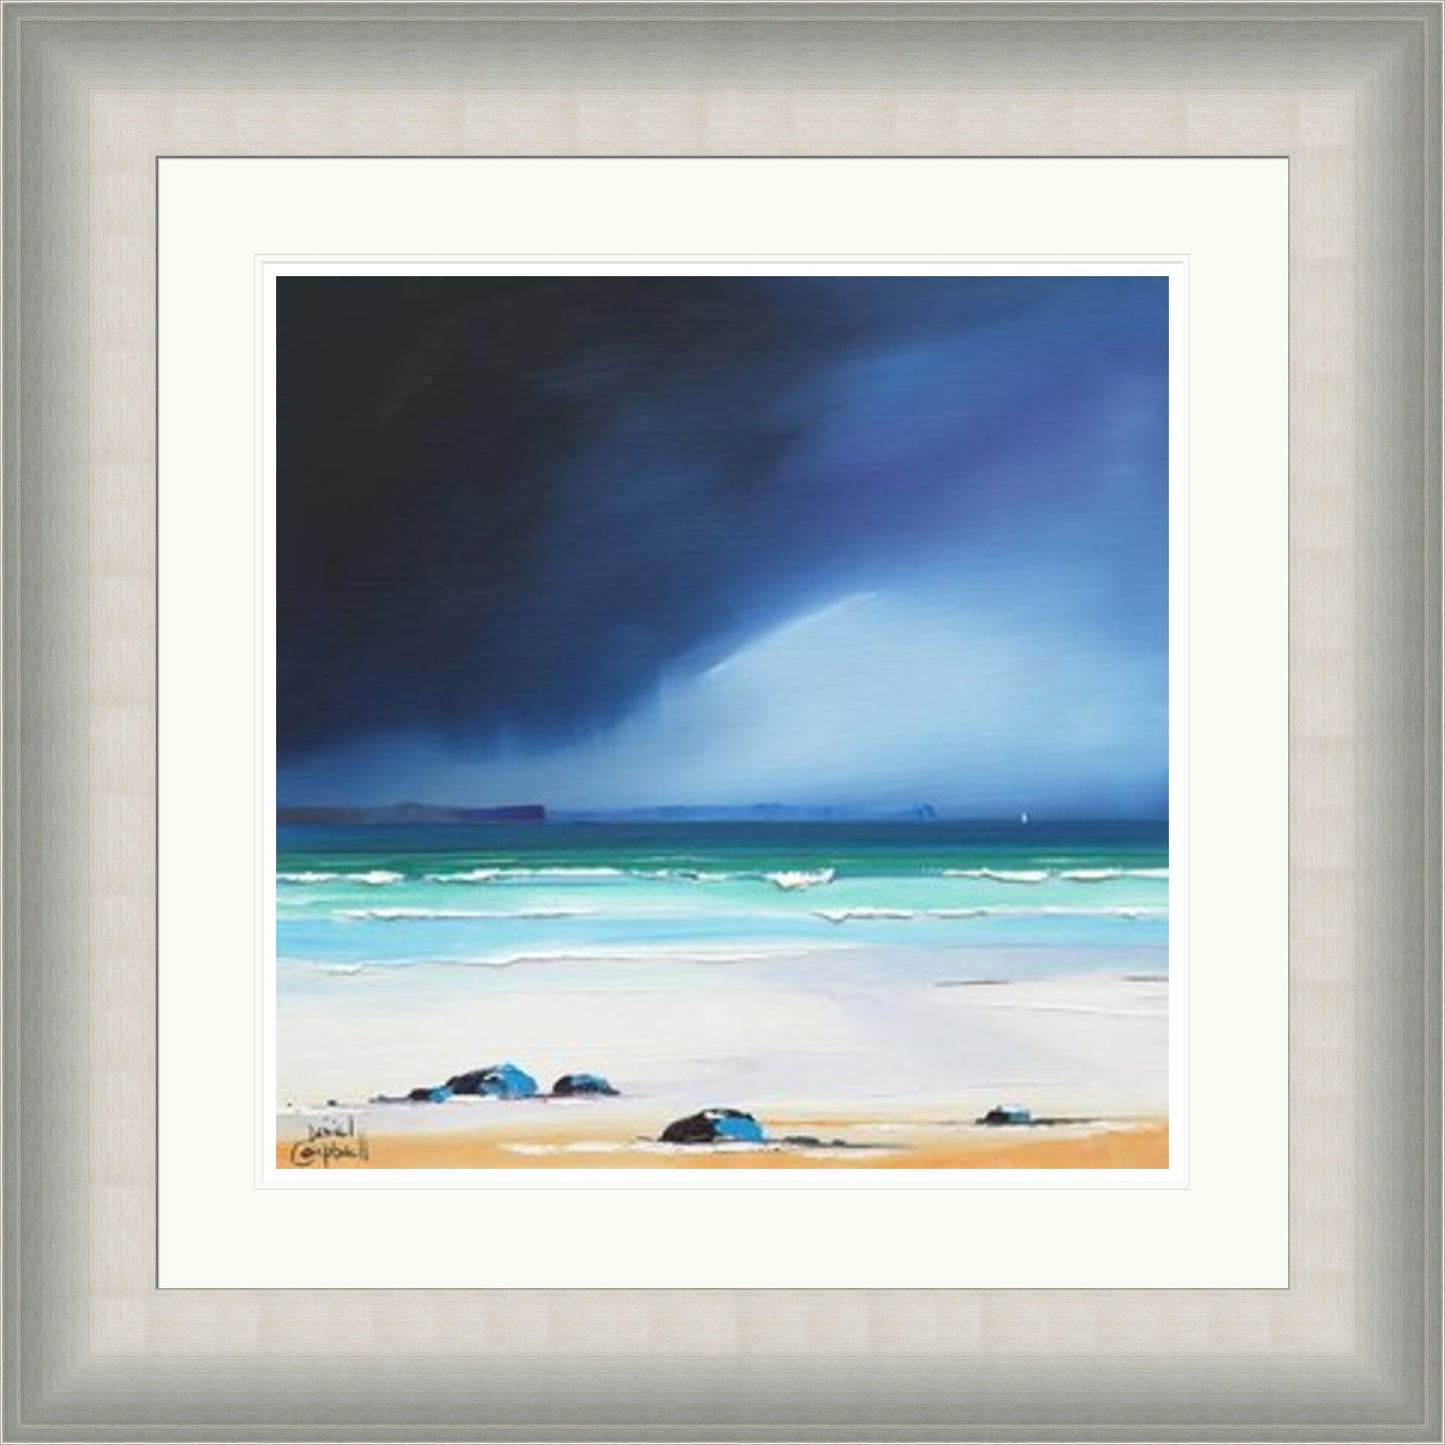 Rain Squall over Eigg by Daniel Campbell